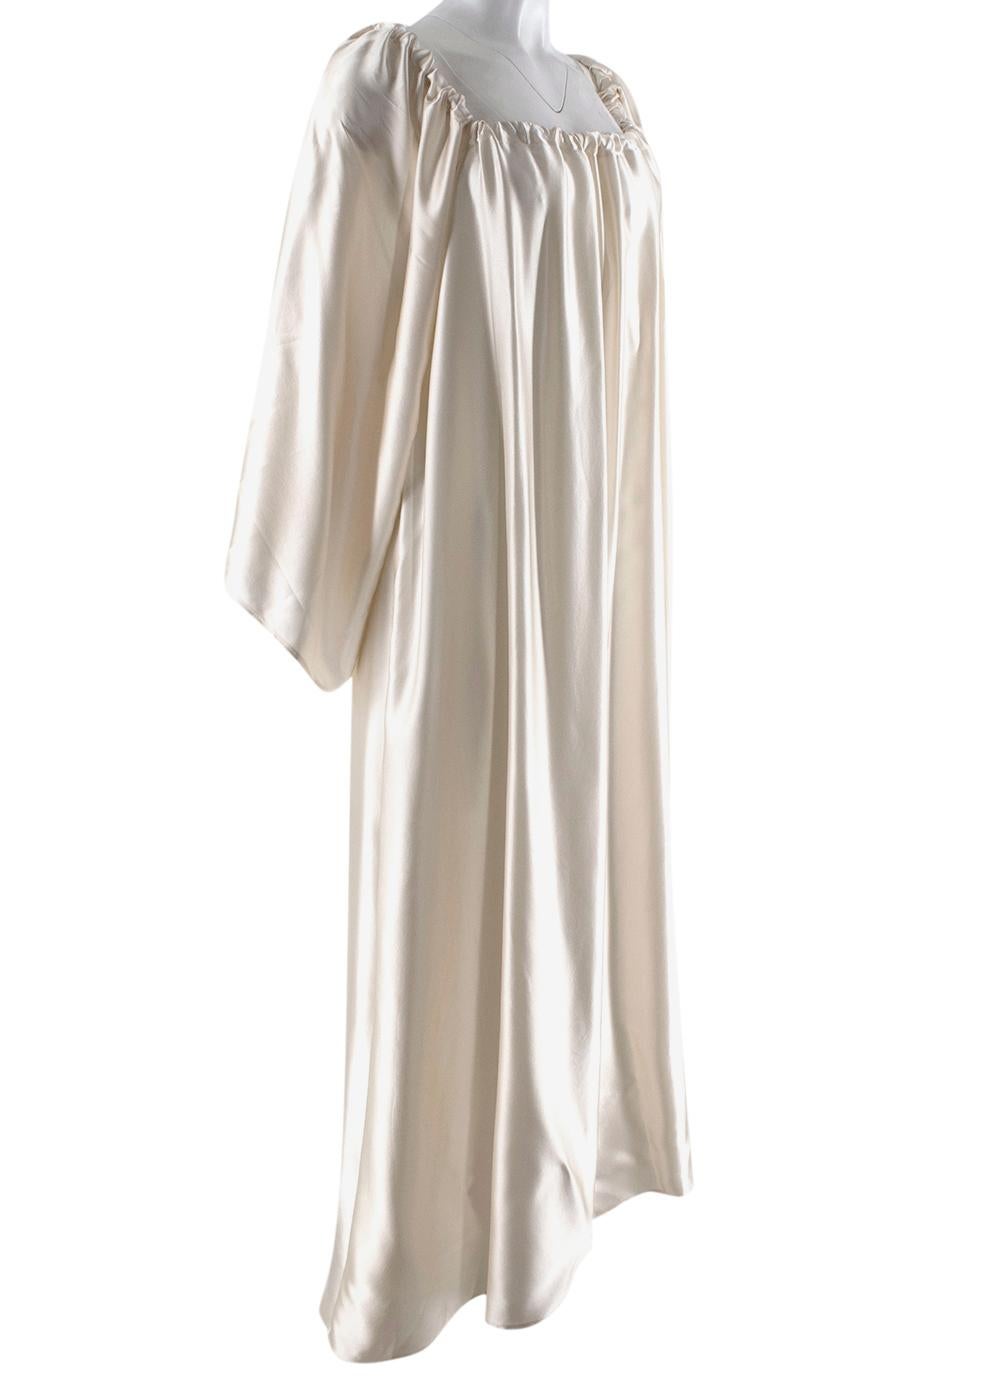 Henriette Von Gruenberg Bettina Silk Satin Low Back Draped Gown 

- A collaboration between contemporary silks brand Henriette Von Gruenberg, and stylist Bettina Looney
- 4.5m of silk satin used to create a voluminous style, with gathered low back